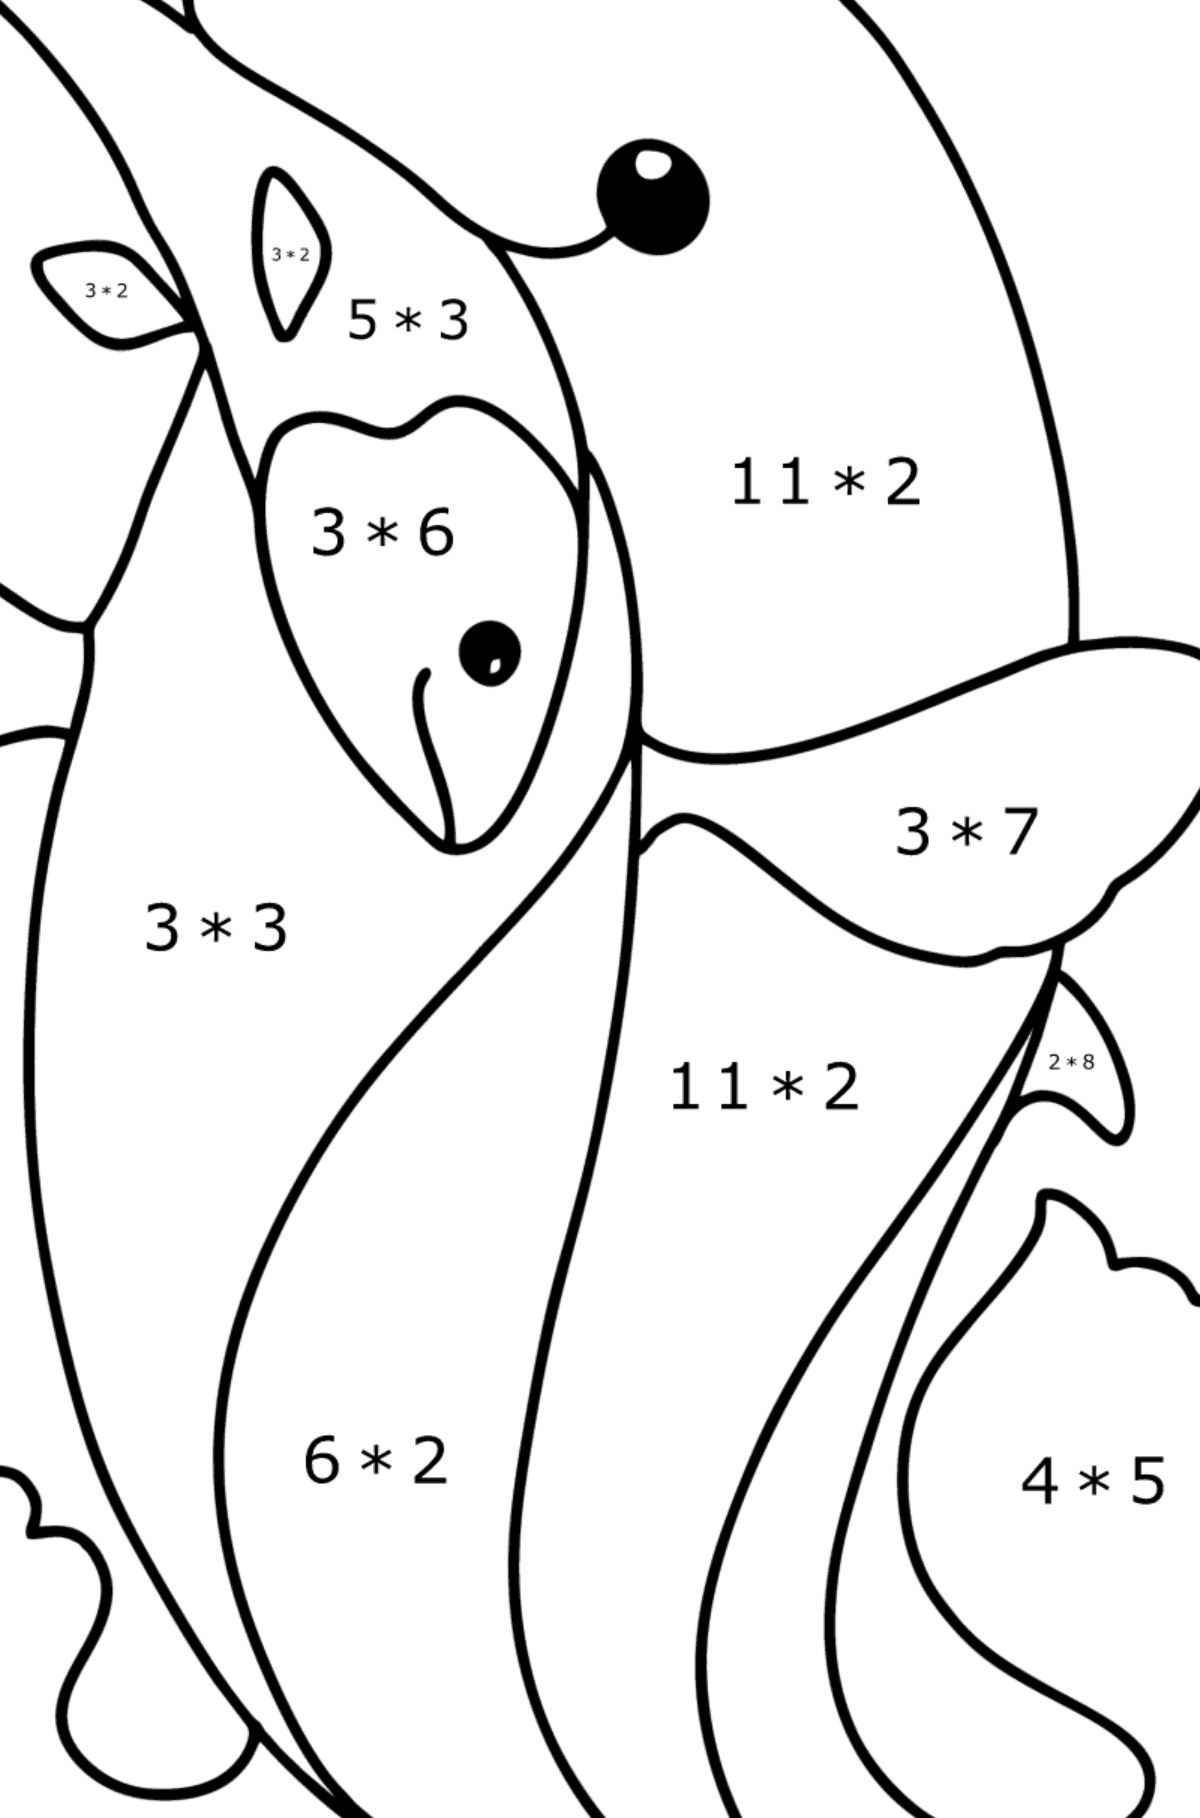 Dolphin Caught a Fish coloring page - Math Coloring - Multiplication for Kids